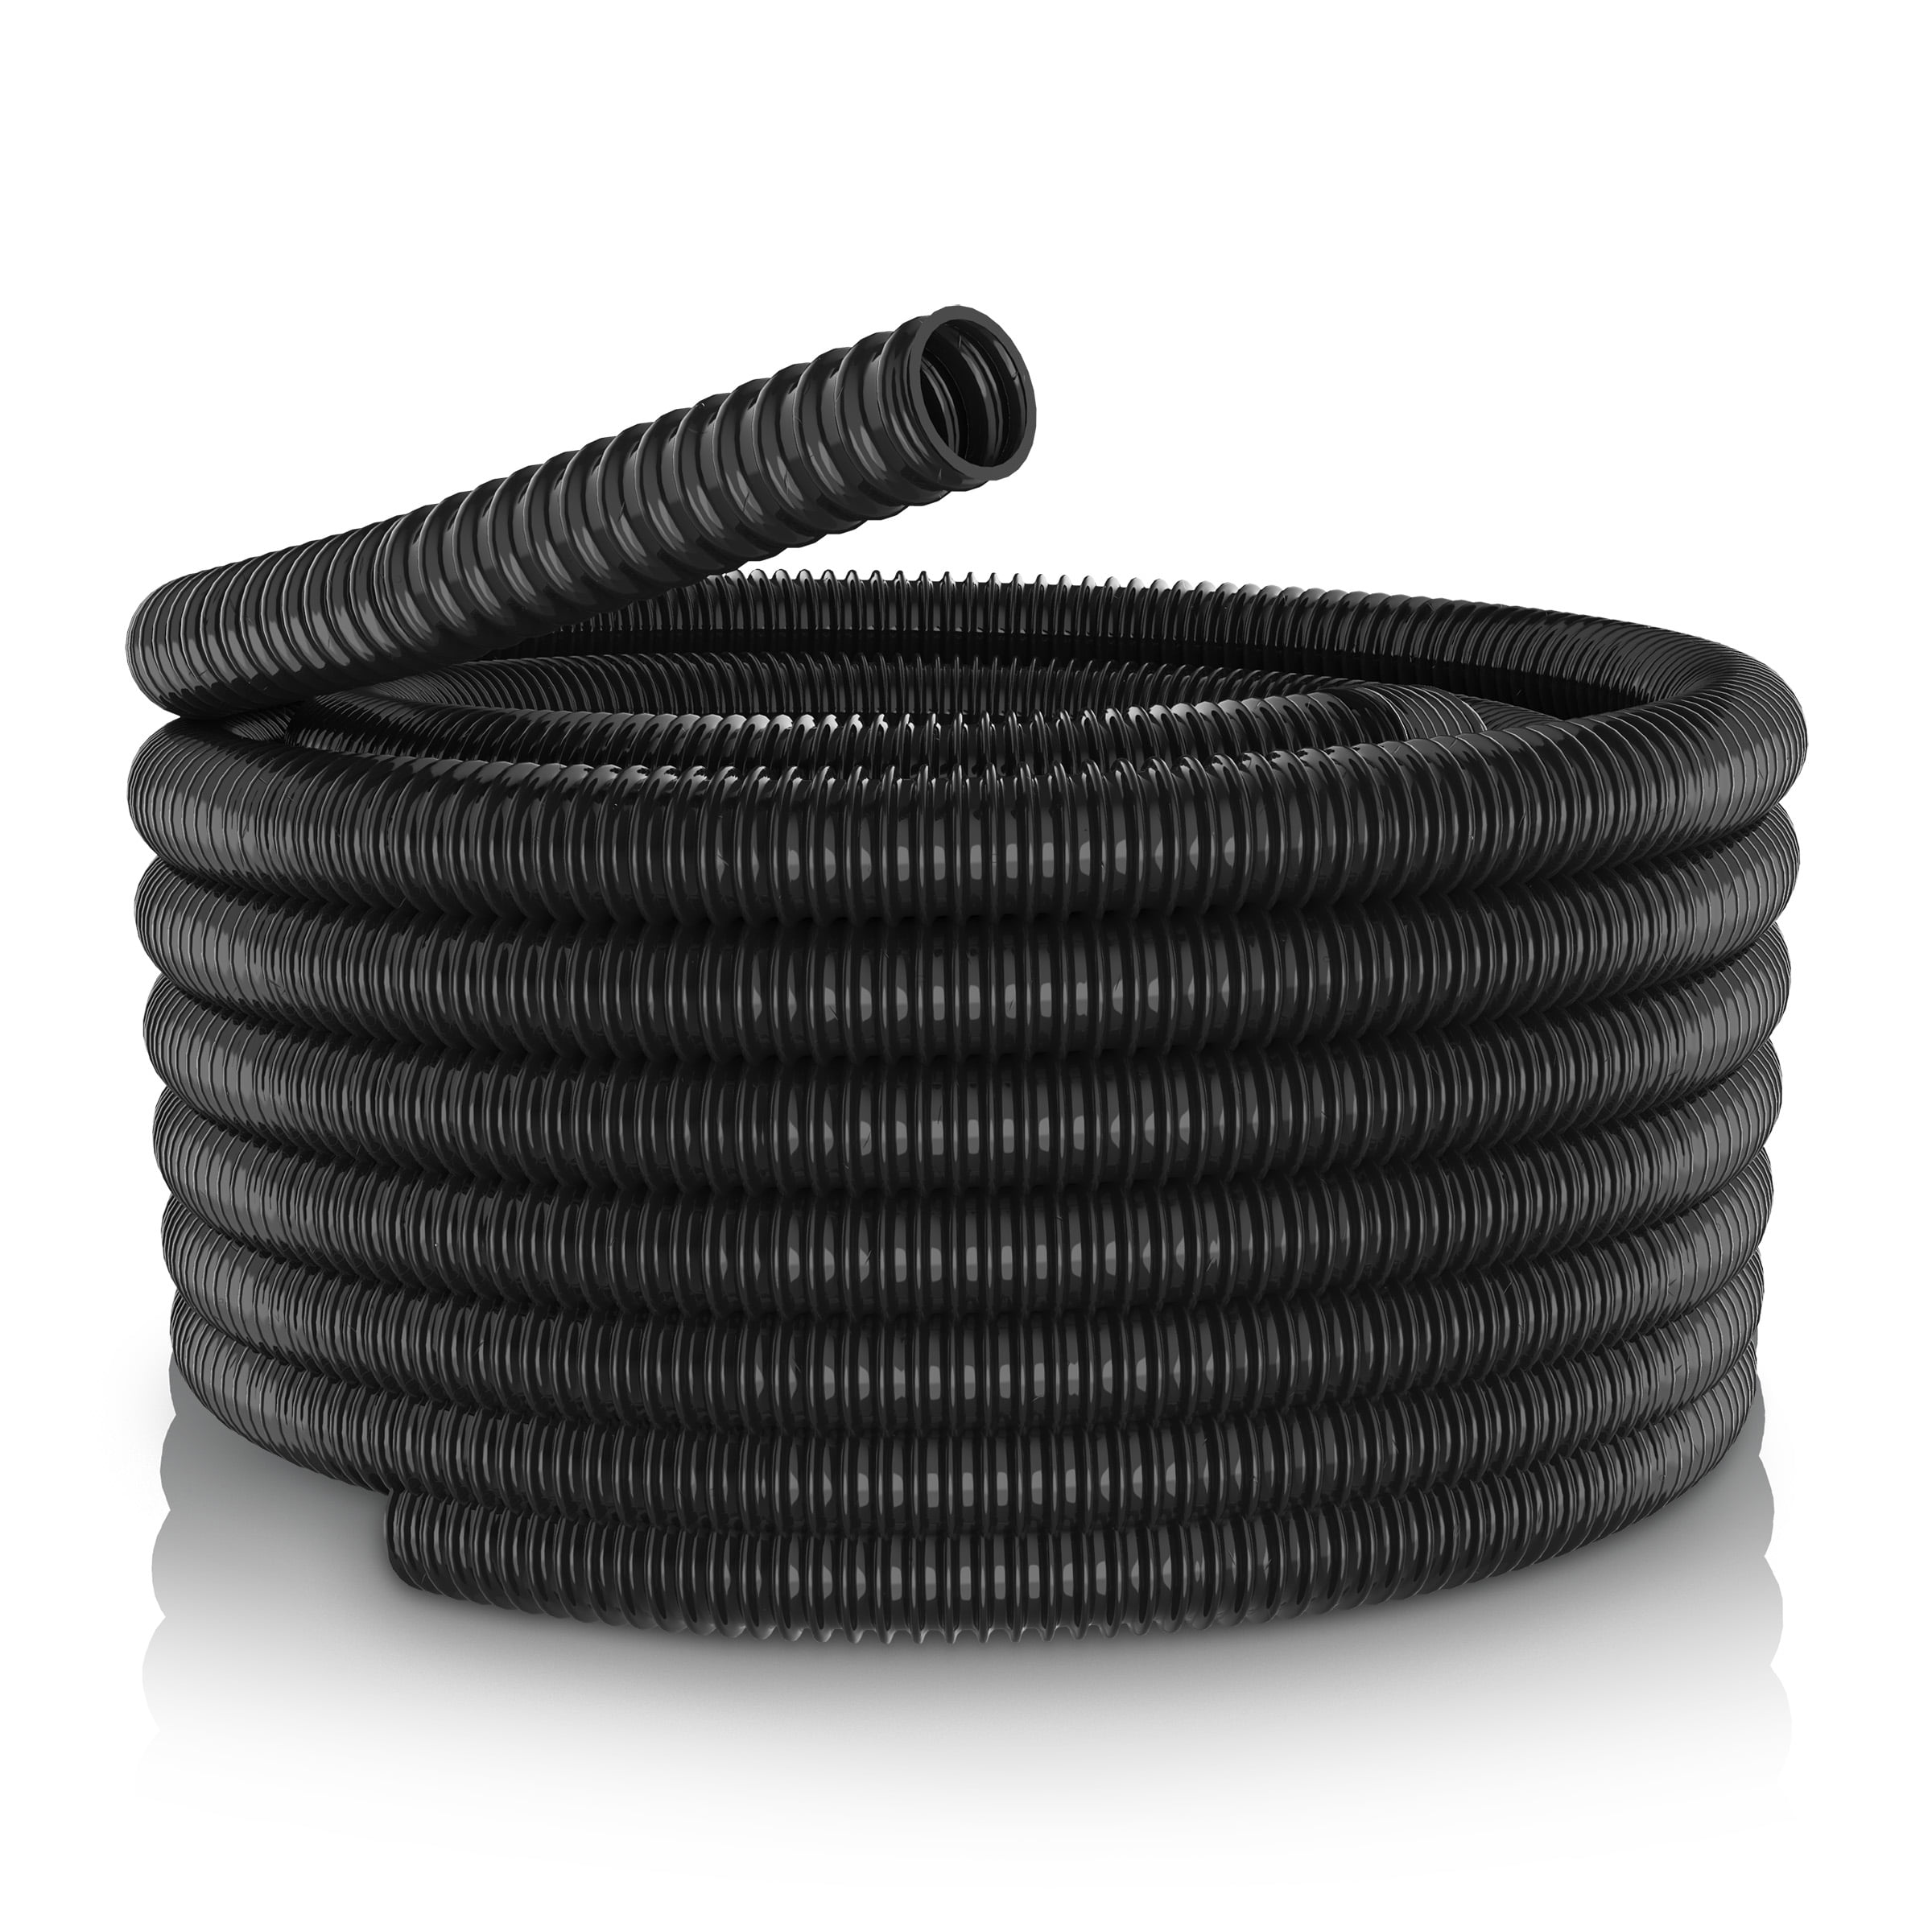 25 ft Kink Free US Pond Hose 3/4" ID-flexible-spiral tubing-water garden feature 